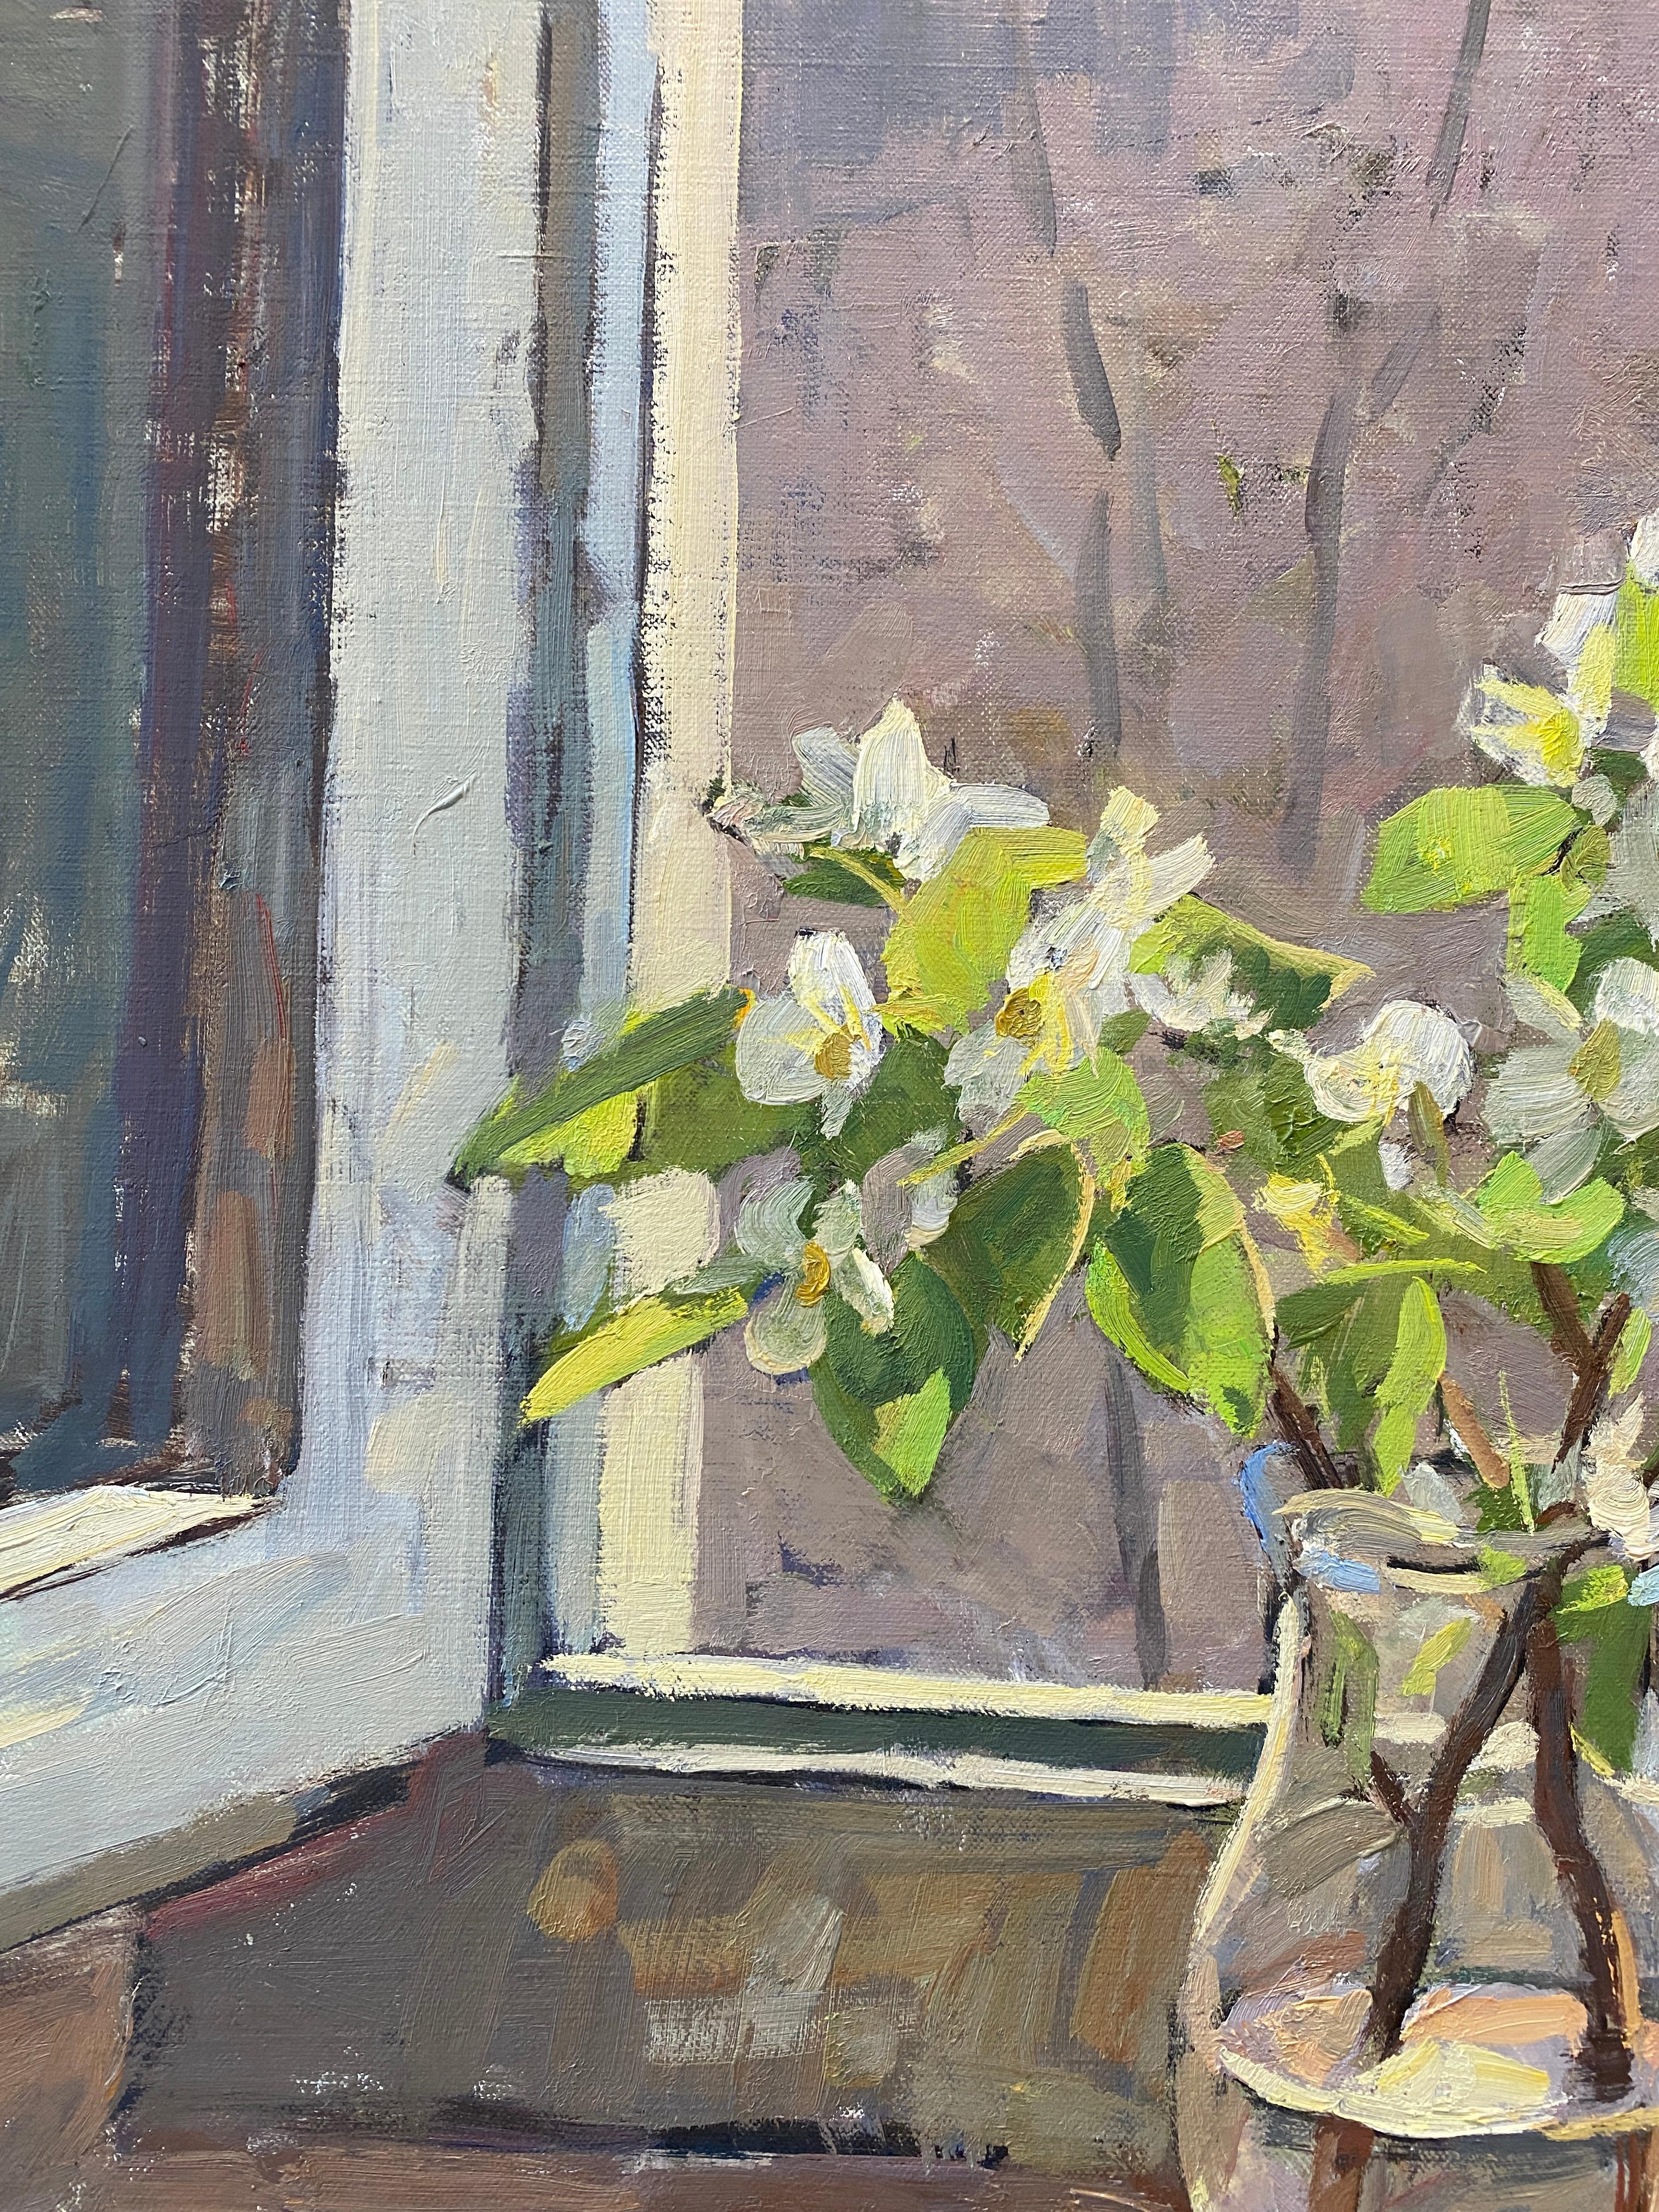 An oil painting that acts as both a still life, and an interior painting. A glass pitcher holds a pair of branches from a pear tree, flowering white pear blossoms reach upward amidst large green leaves. A glass paned window half open, gives fresh